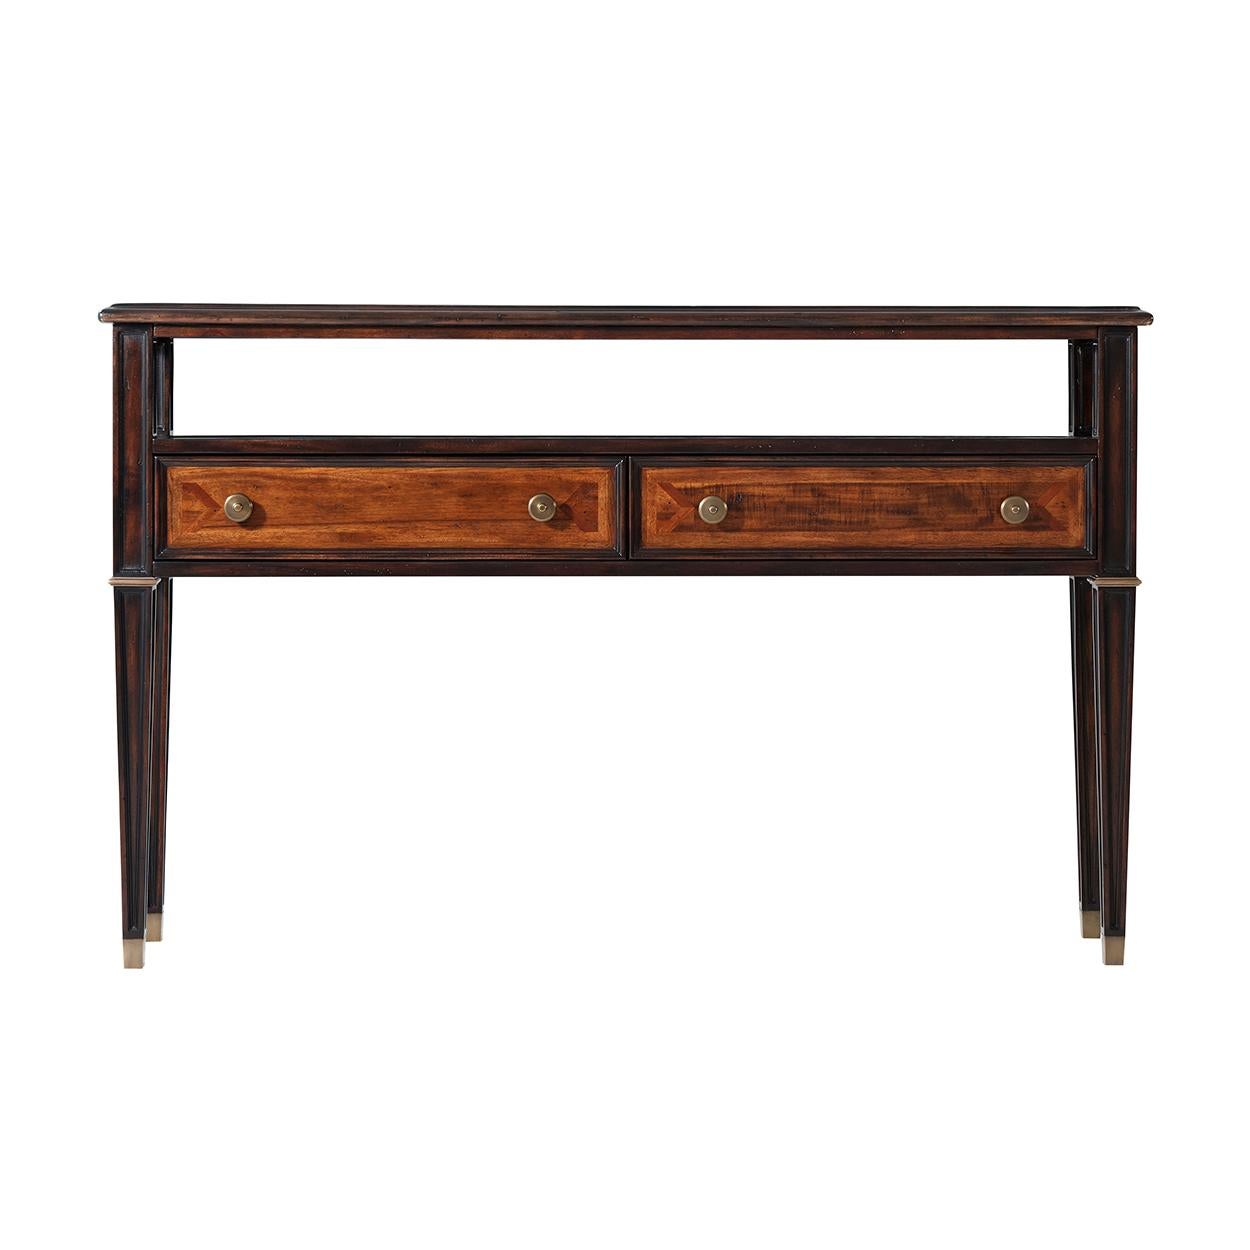 An Italian neoclassic parquetry console table, the rectangular moulded edge and glass inset top above an open shelf two drawers below, on square tapering legs with brass cappings. Inspired by a 19th century Italian original.

Dimensions: 54